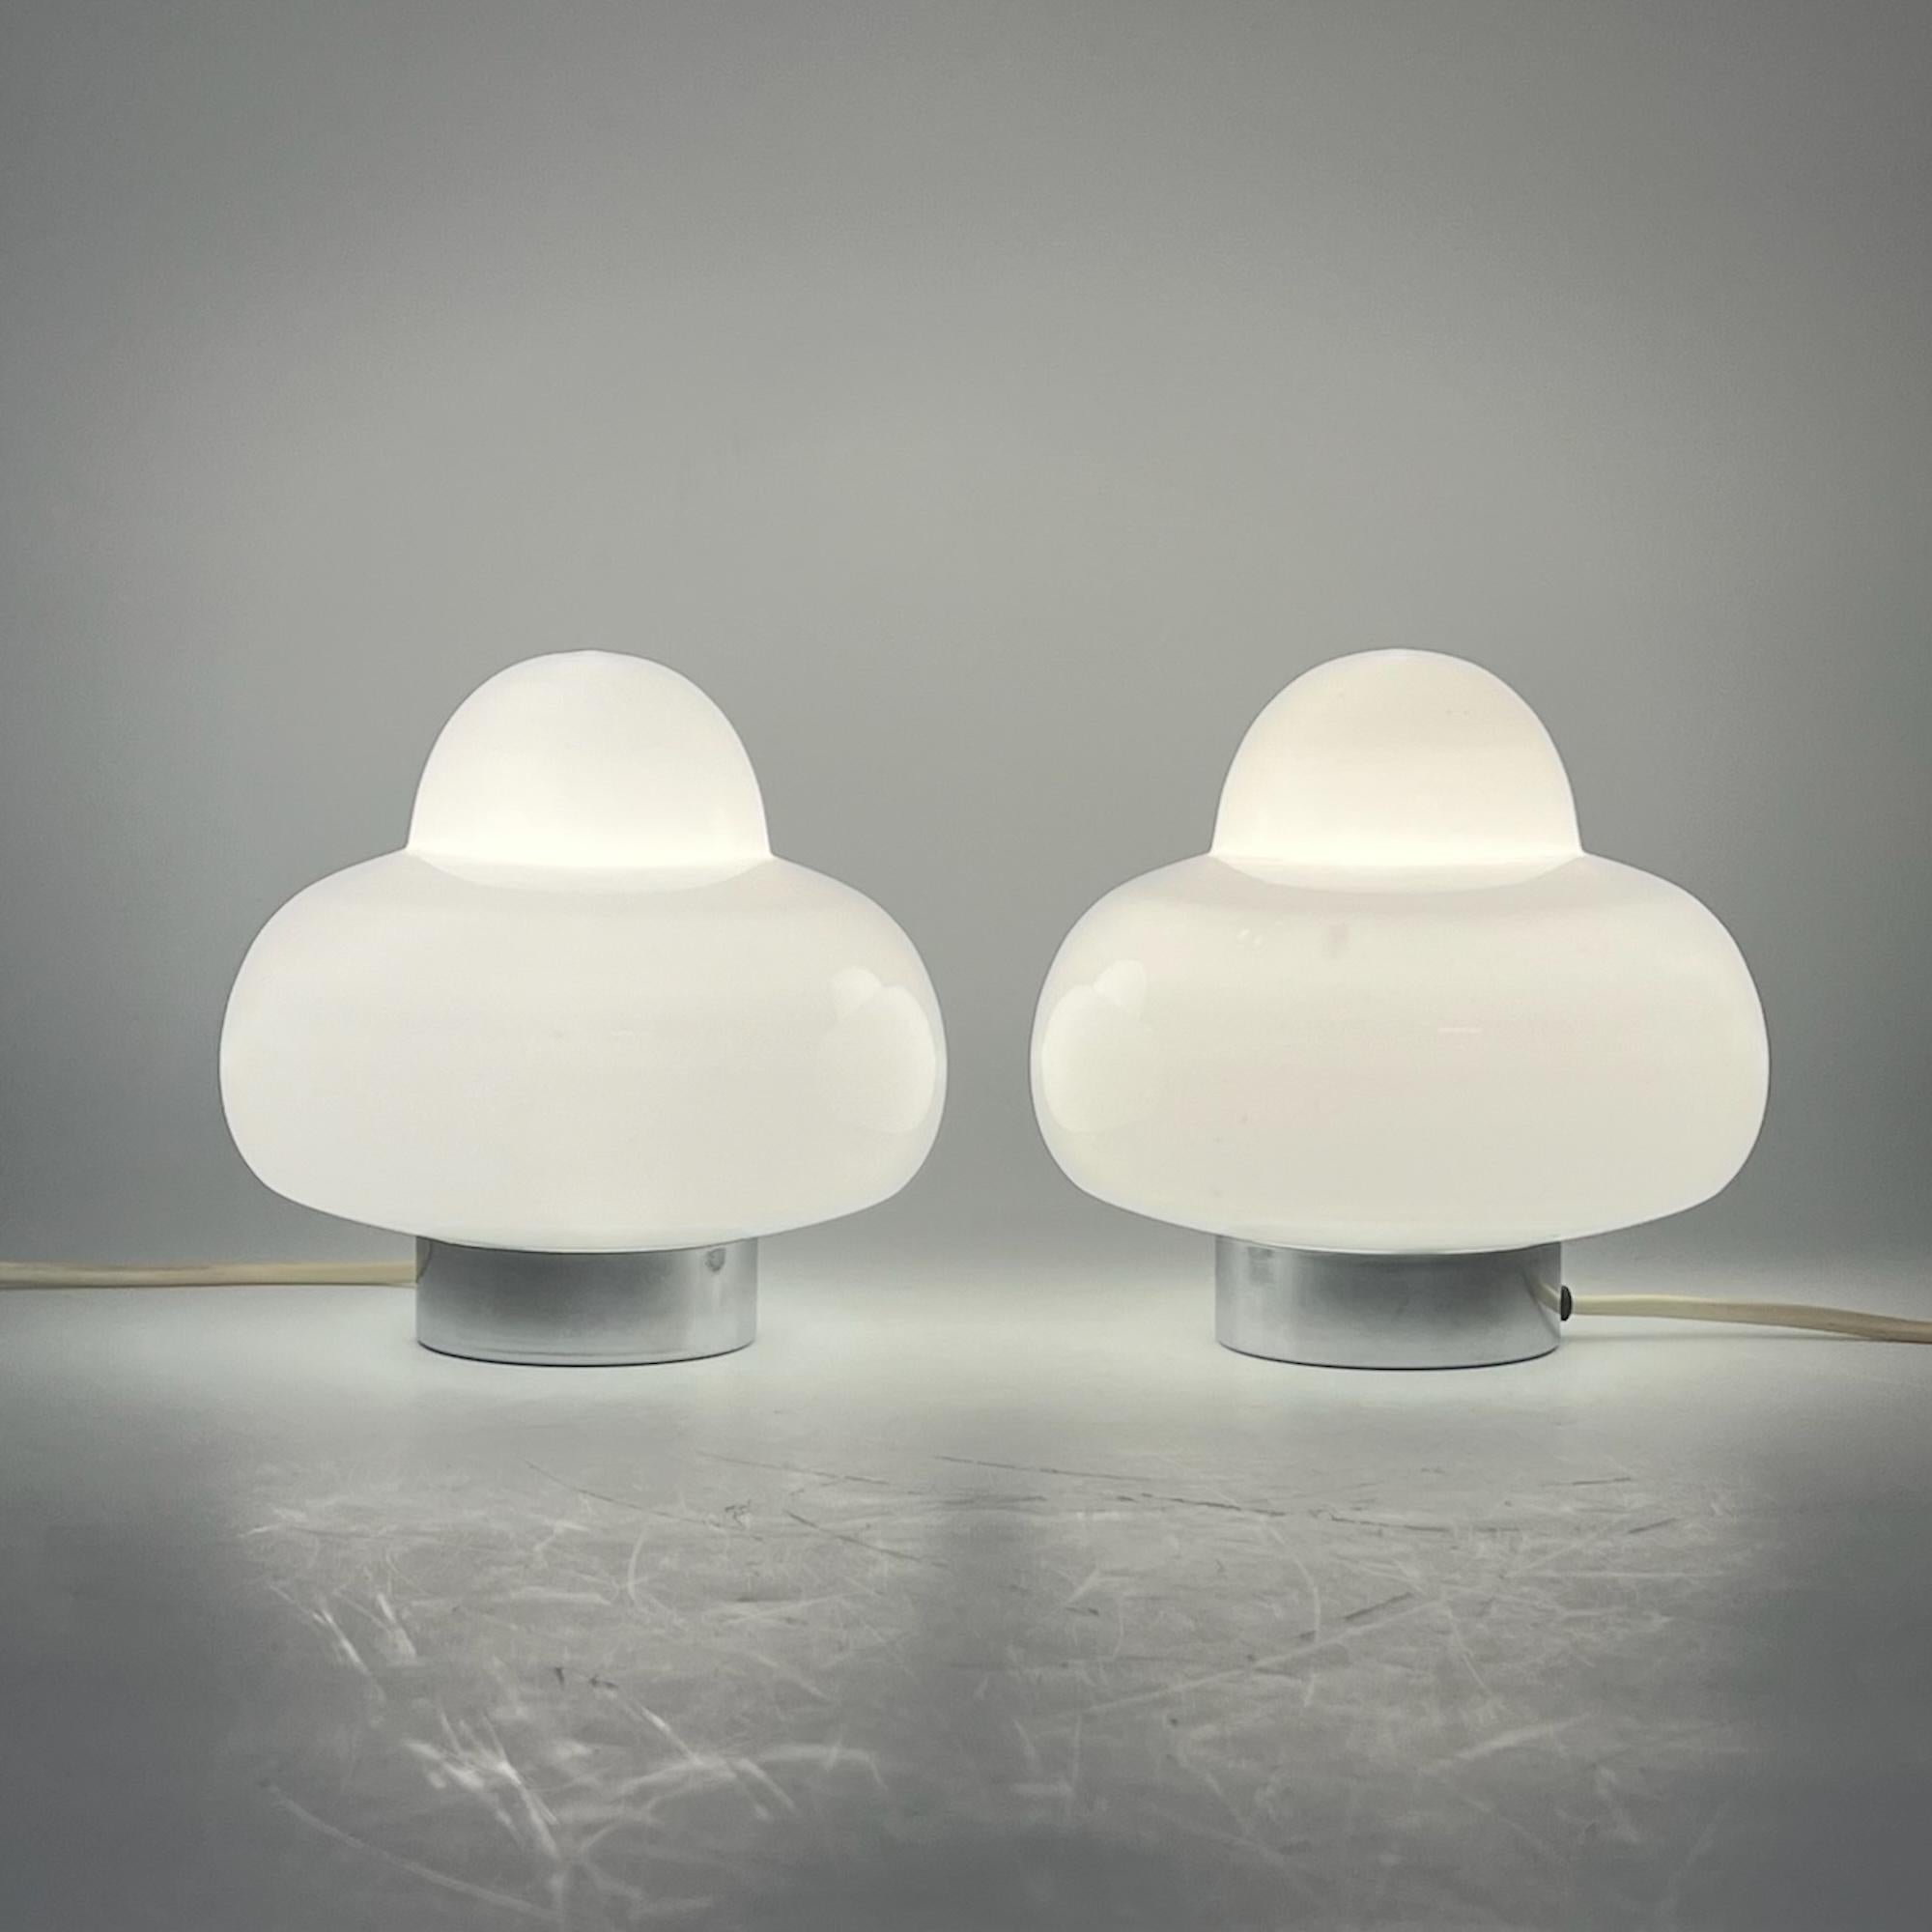 Step into the space age with this authentic Italian 1970s UFO lamp, meticulously crafted to evoke the iconic shape of flying saucers. Settle into the retro-futuristic ambiance as these lamps, with their sleek metal bases and translucent white glass